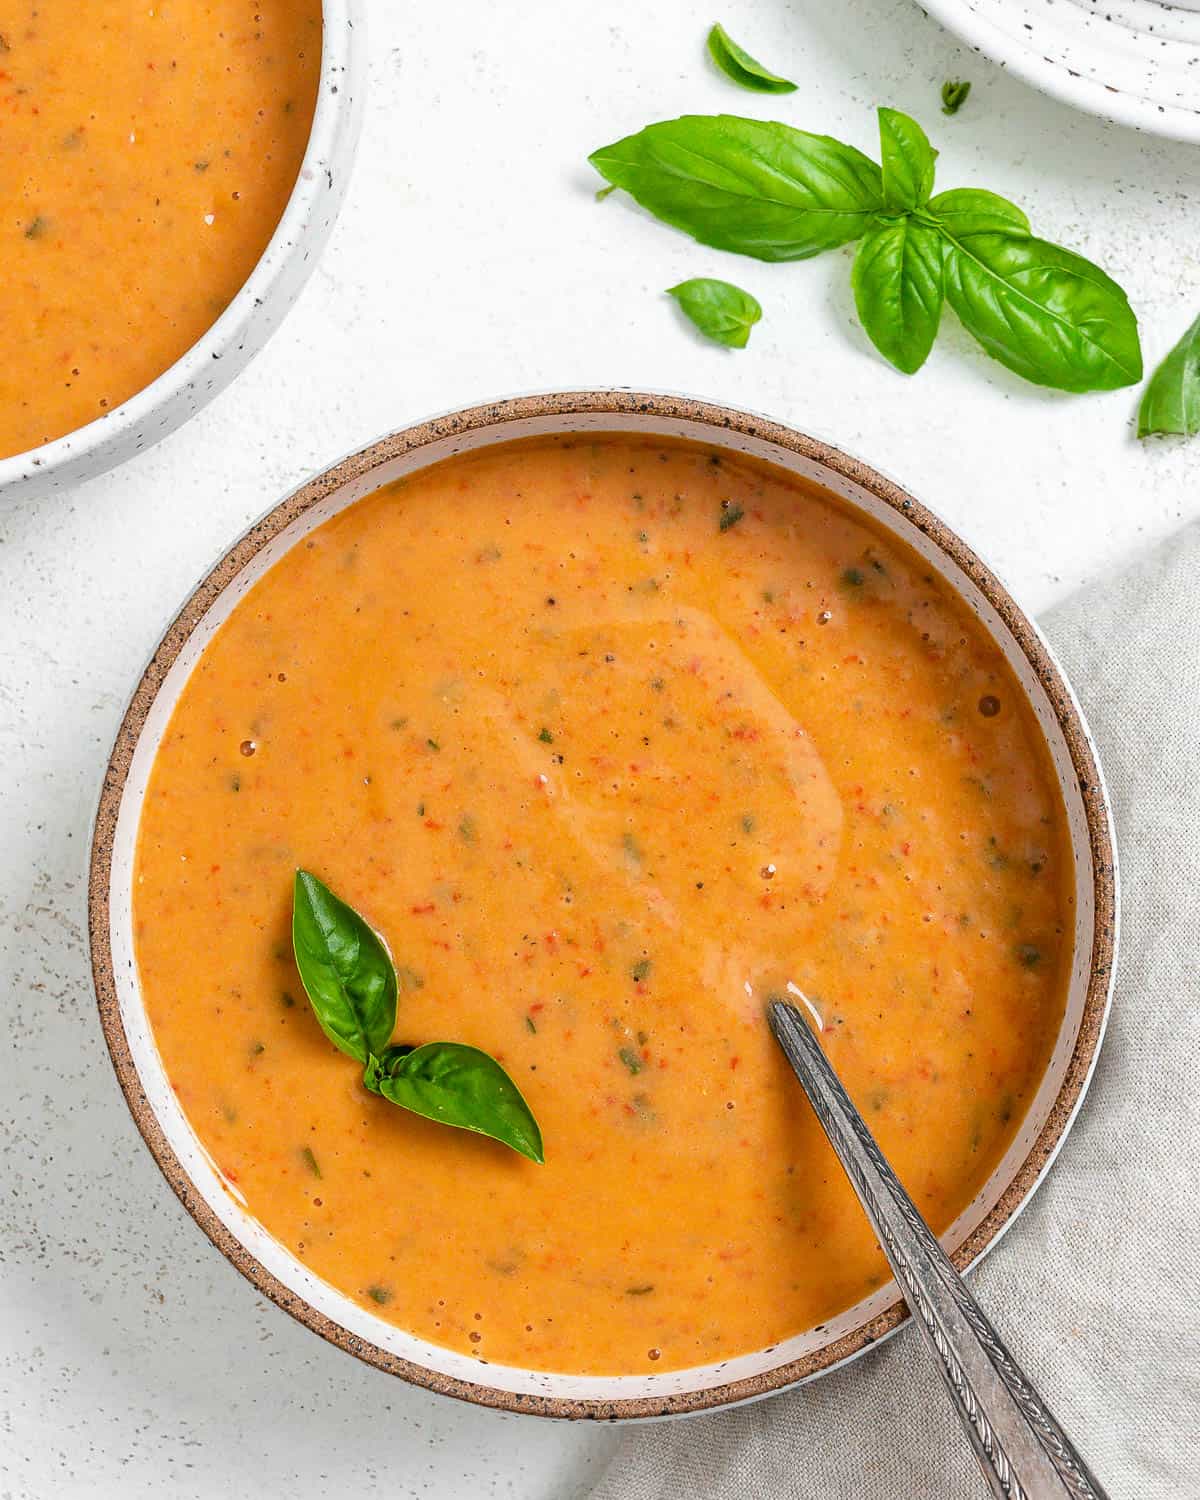 two completed Creamy Roasted Red Pepper Soup in a bowl against a light surface